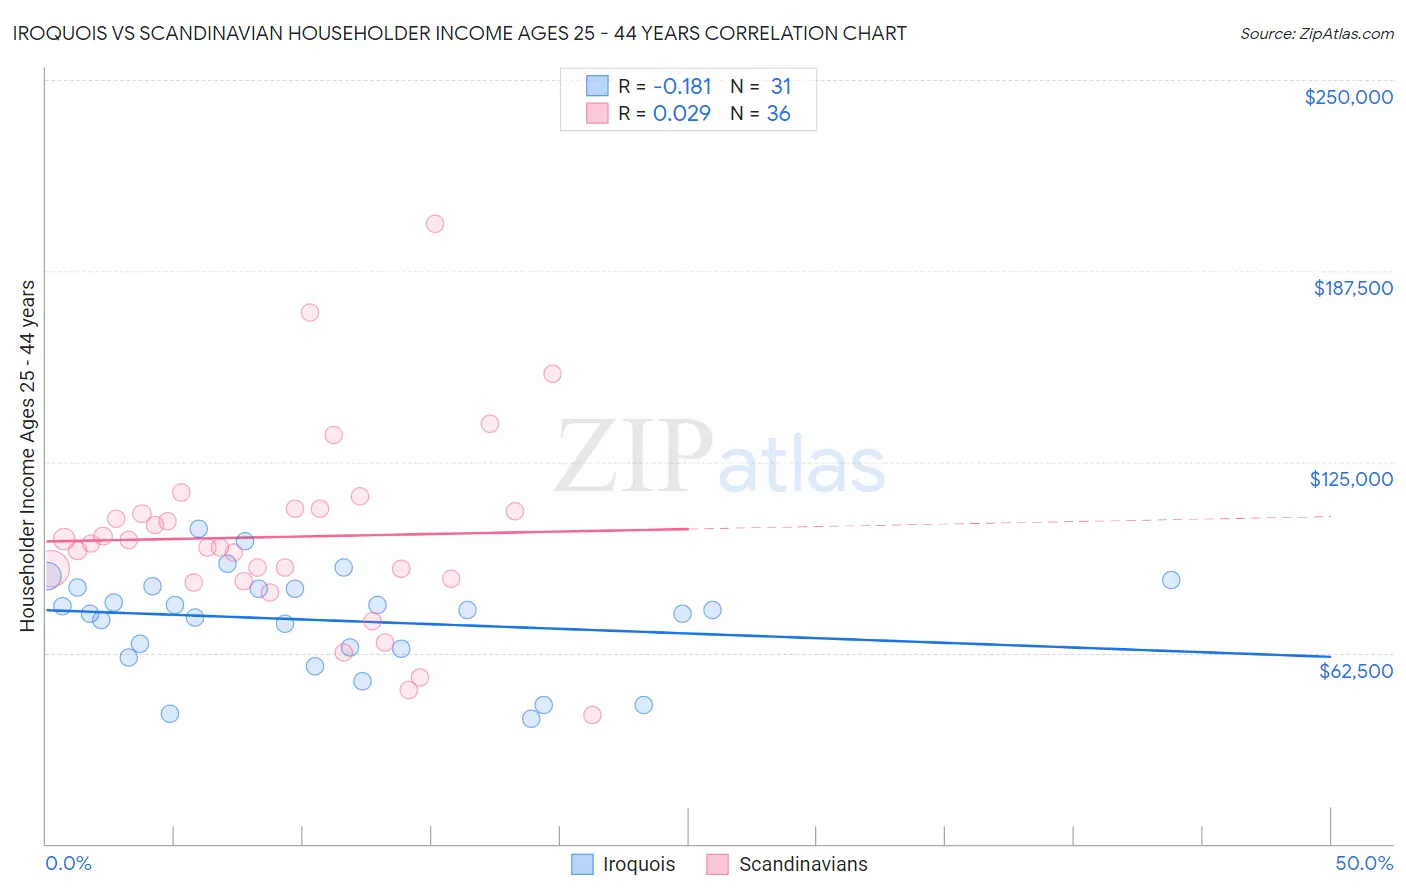 Iroquois vs Scandinavian Householder Income Ages 25 - 44 years